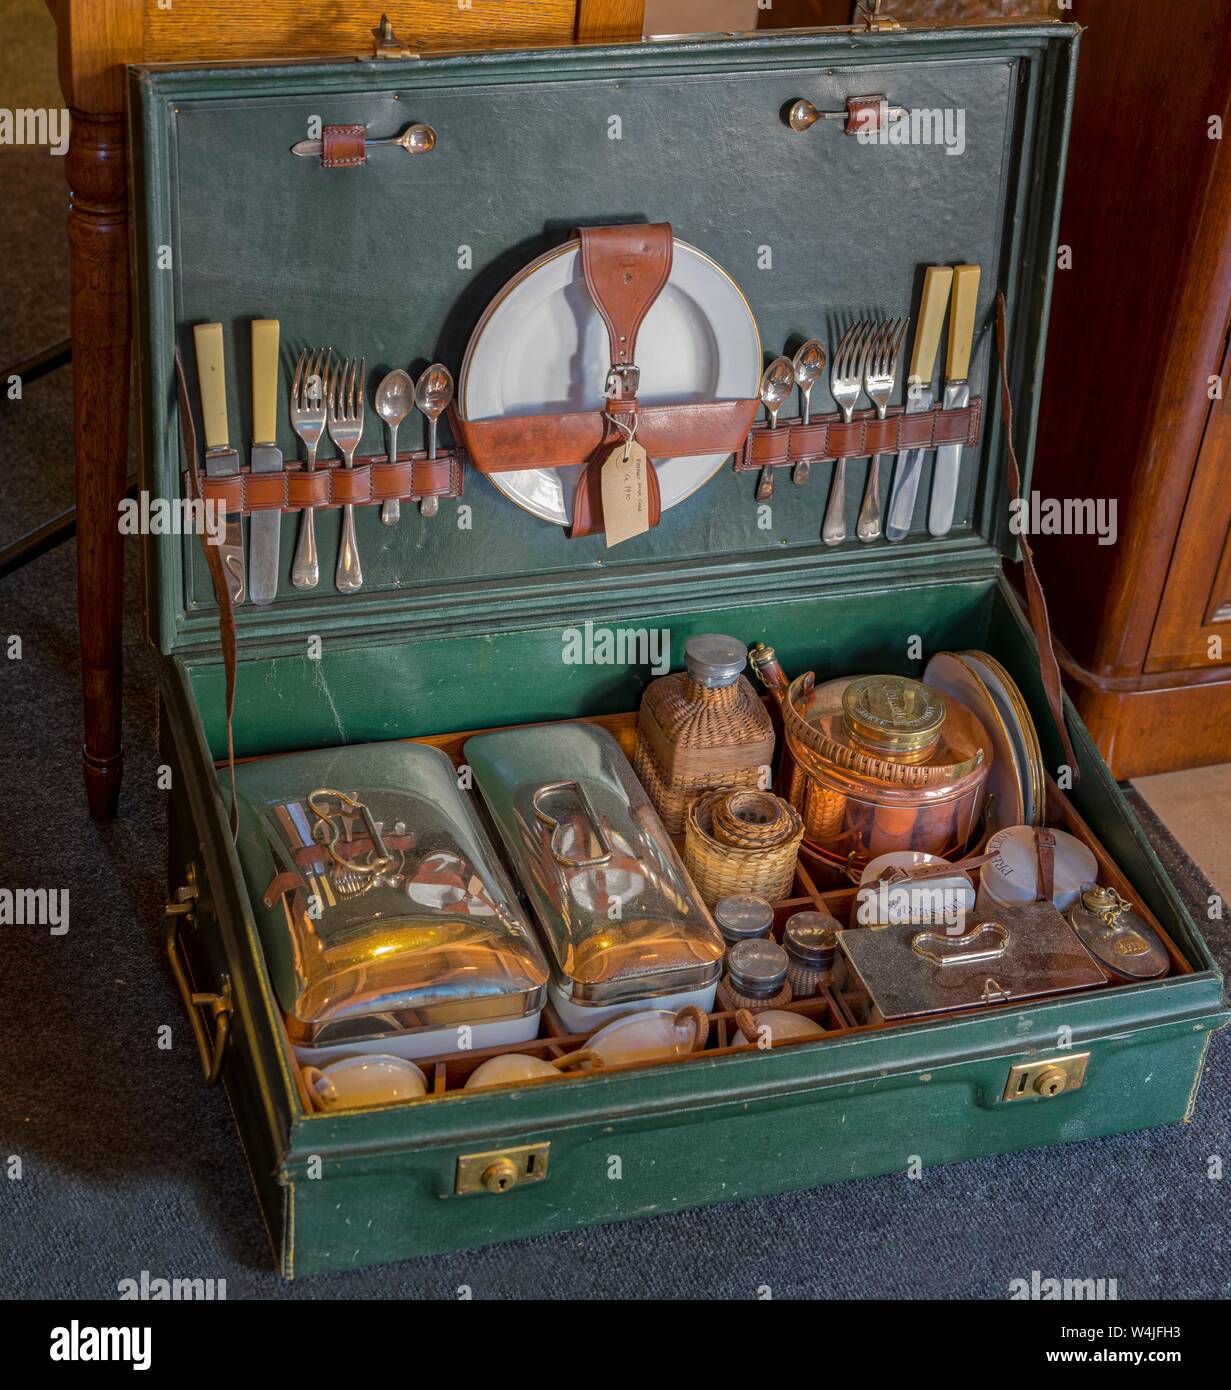 Case with equipment for picnic in the Rolls Royce, 1919, Germany Stock Photo